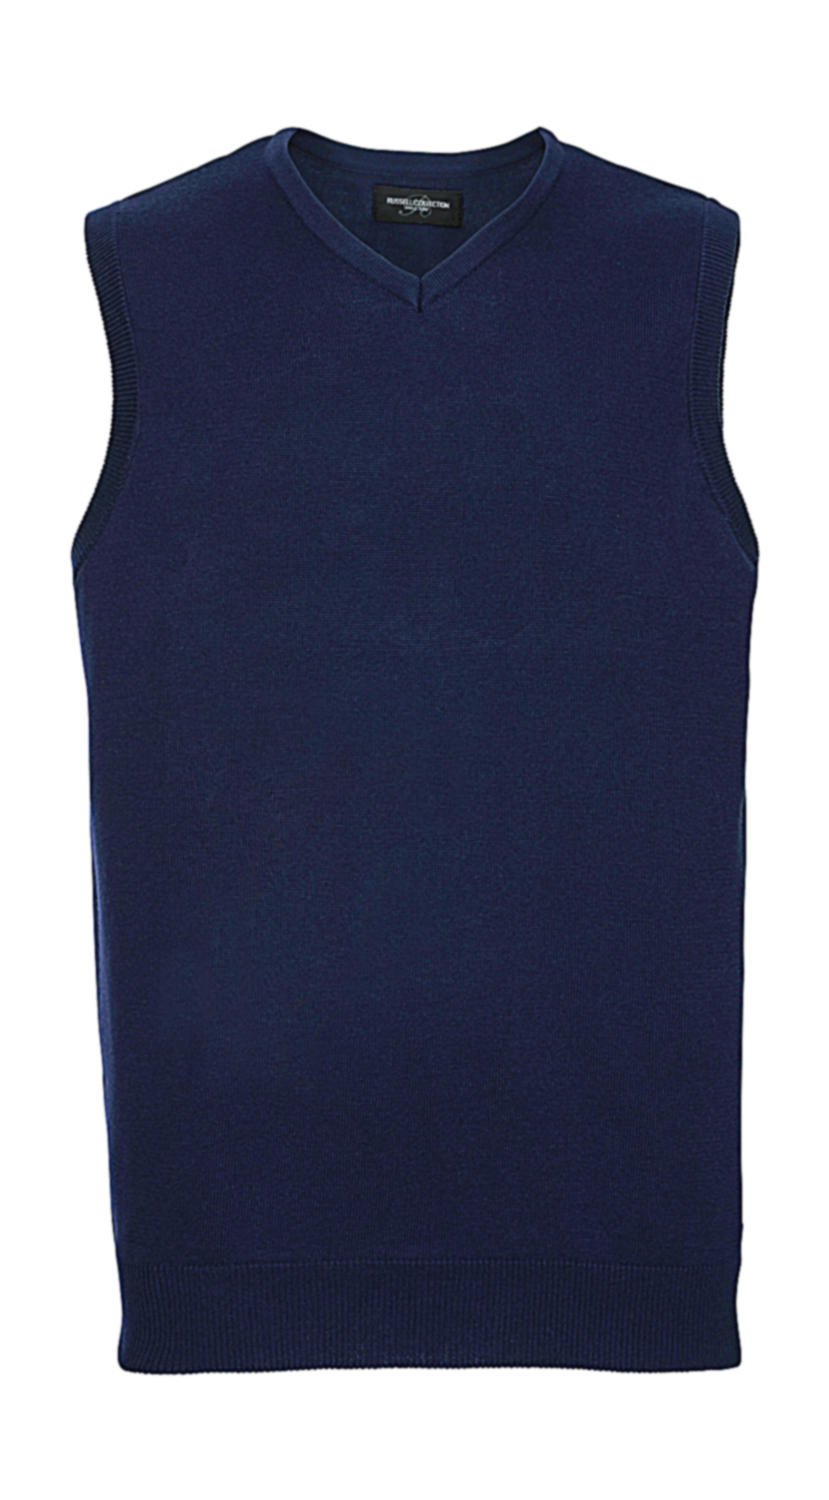  Adults V-Neck Sleeveless Knitted Pullover in Farbe Denim Marl